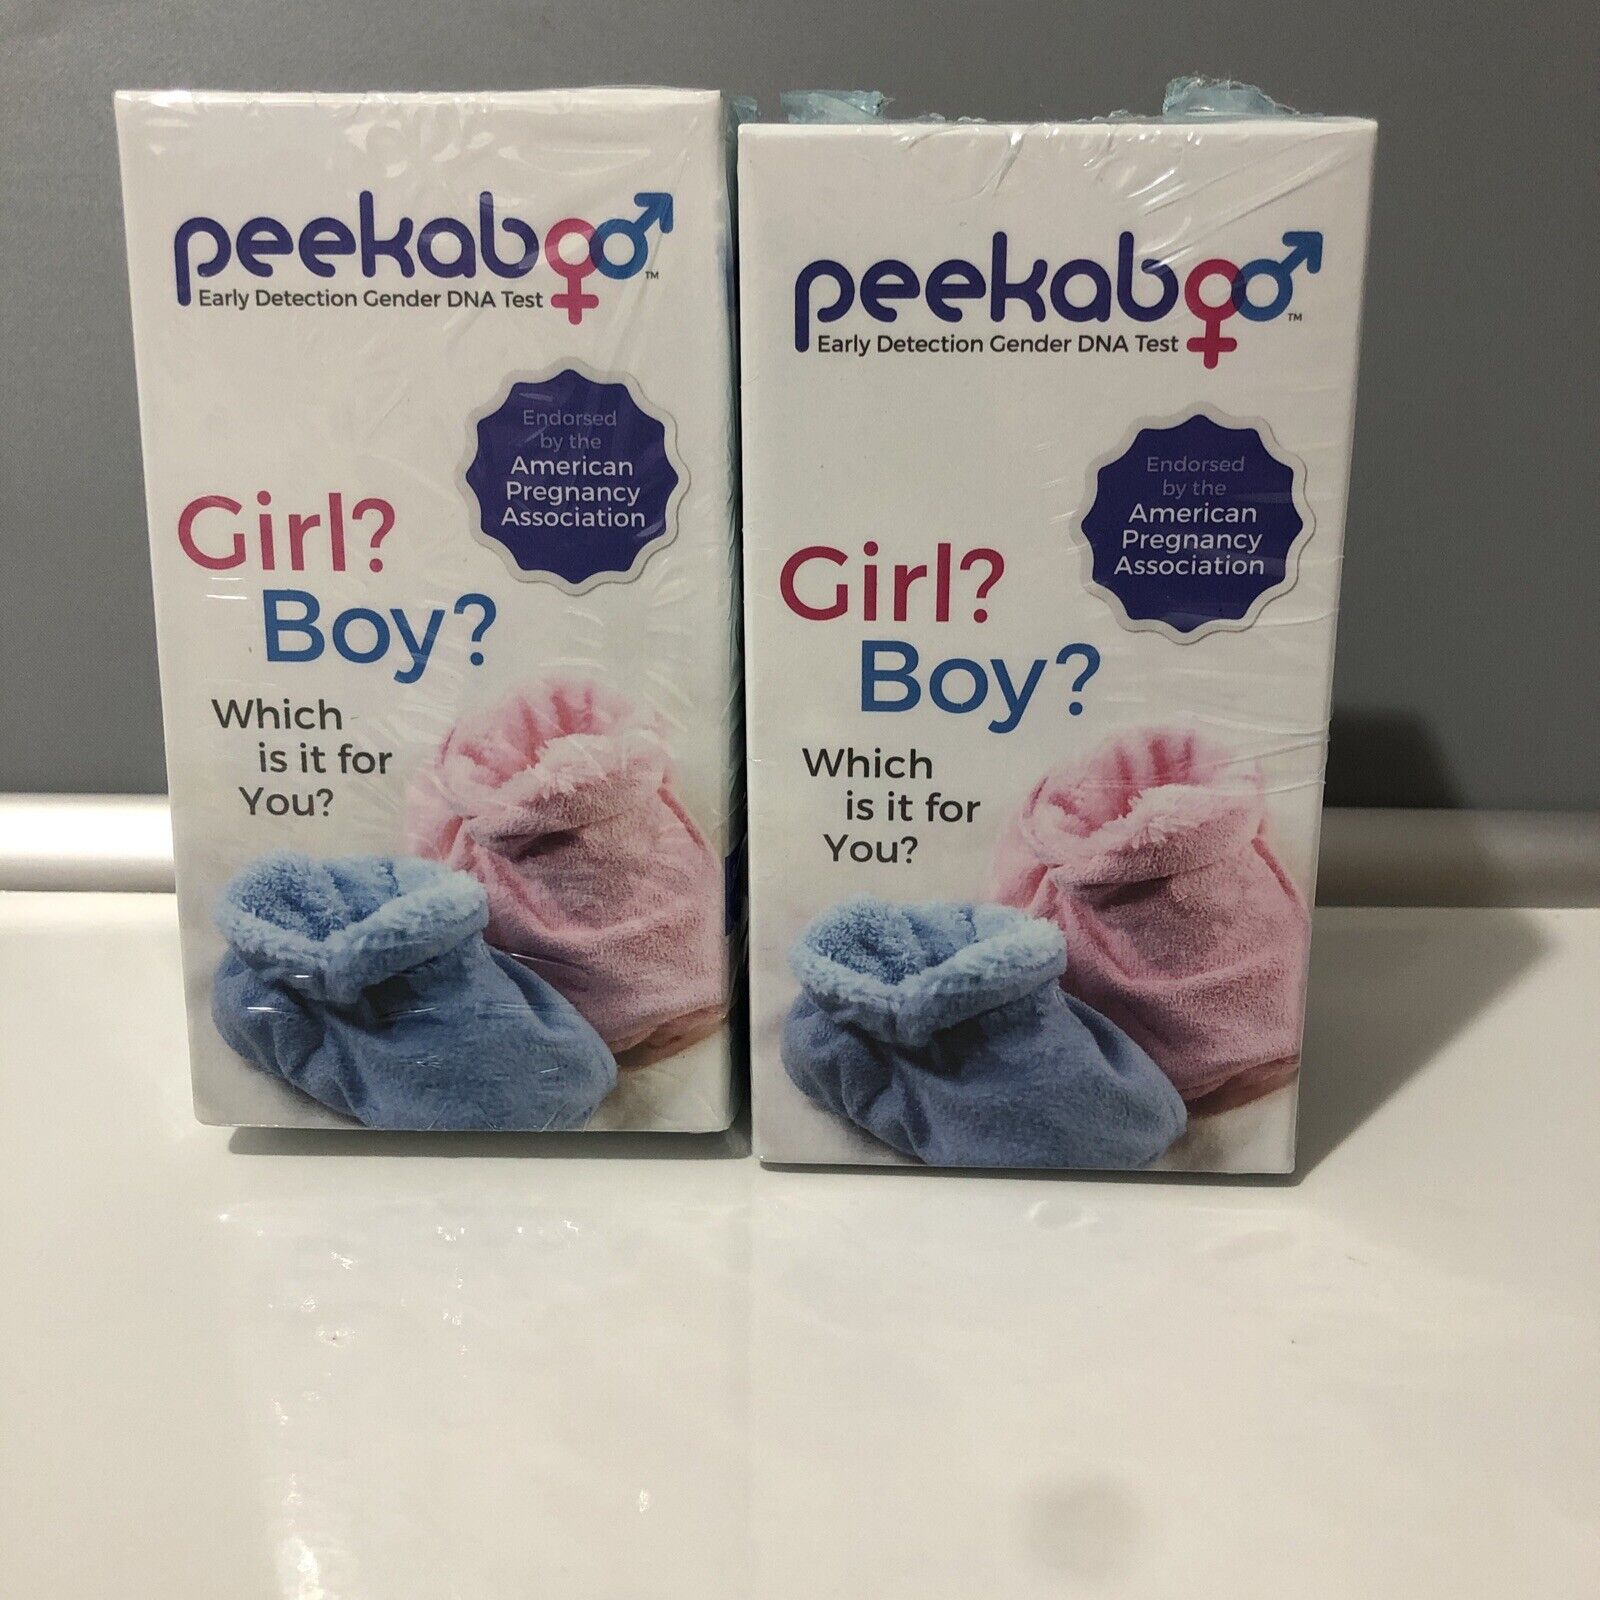 Lot Of 2 Peekaboo Early Detection Gender Dna Test $54 Lab Fee Required Exp 11/22